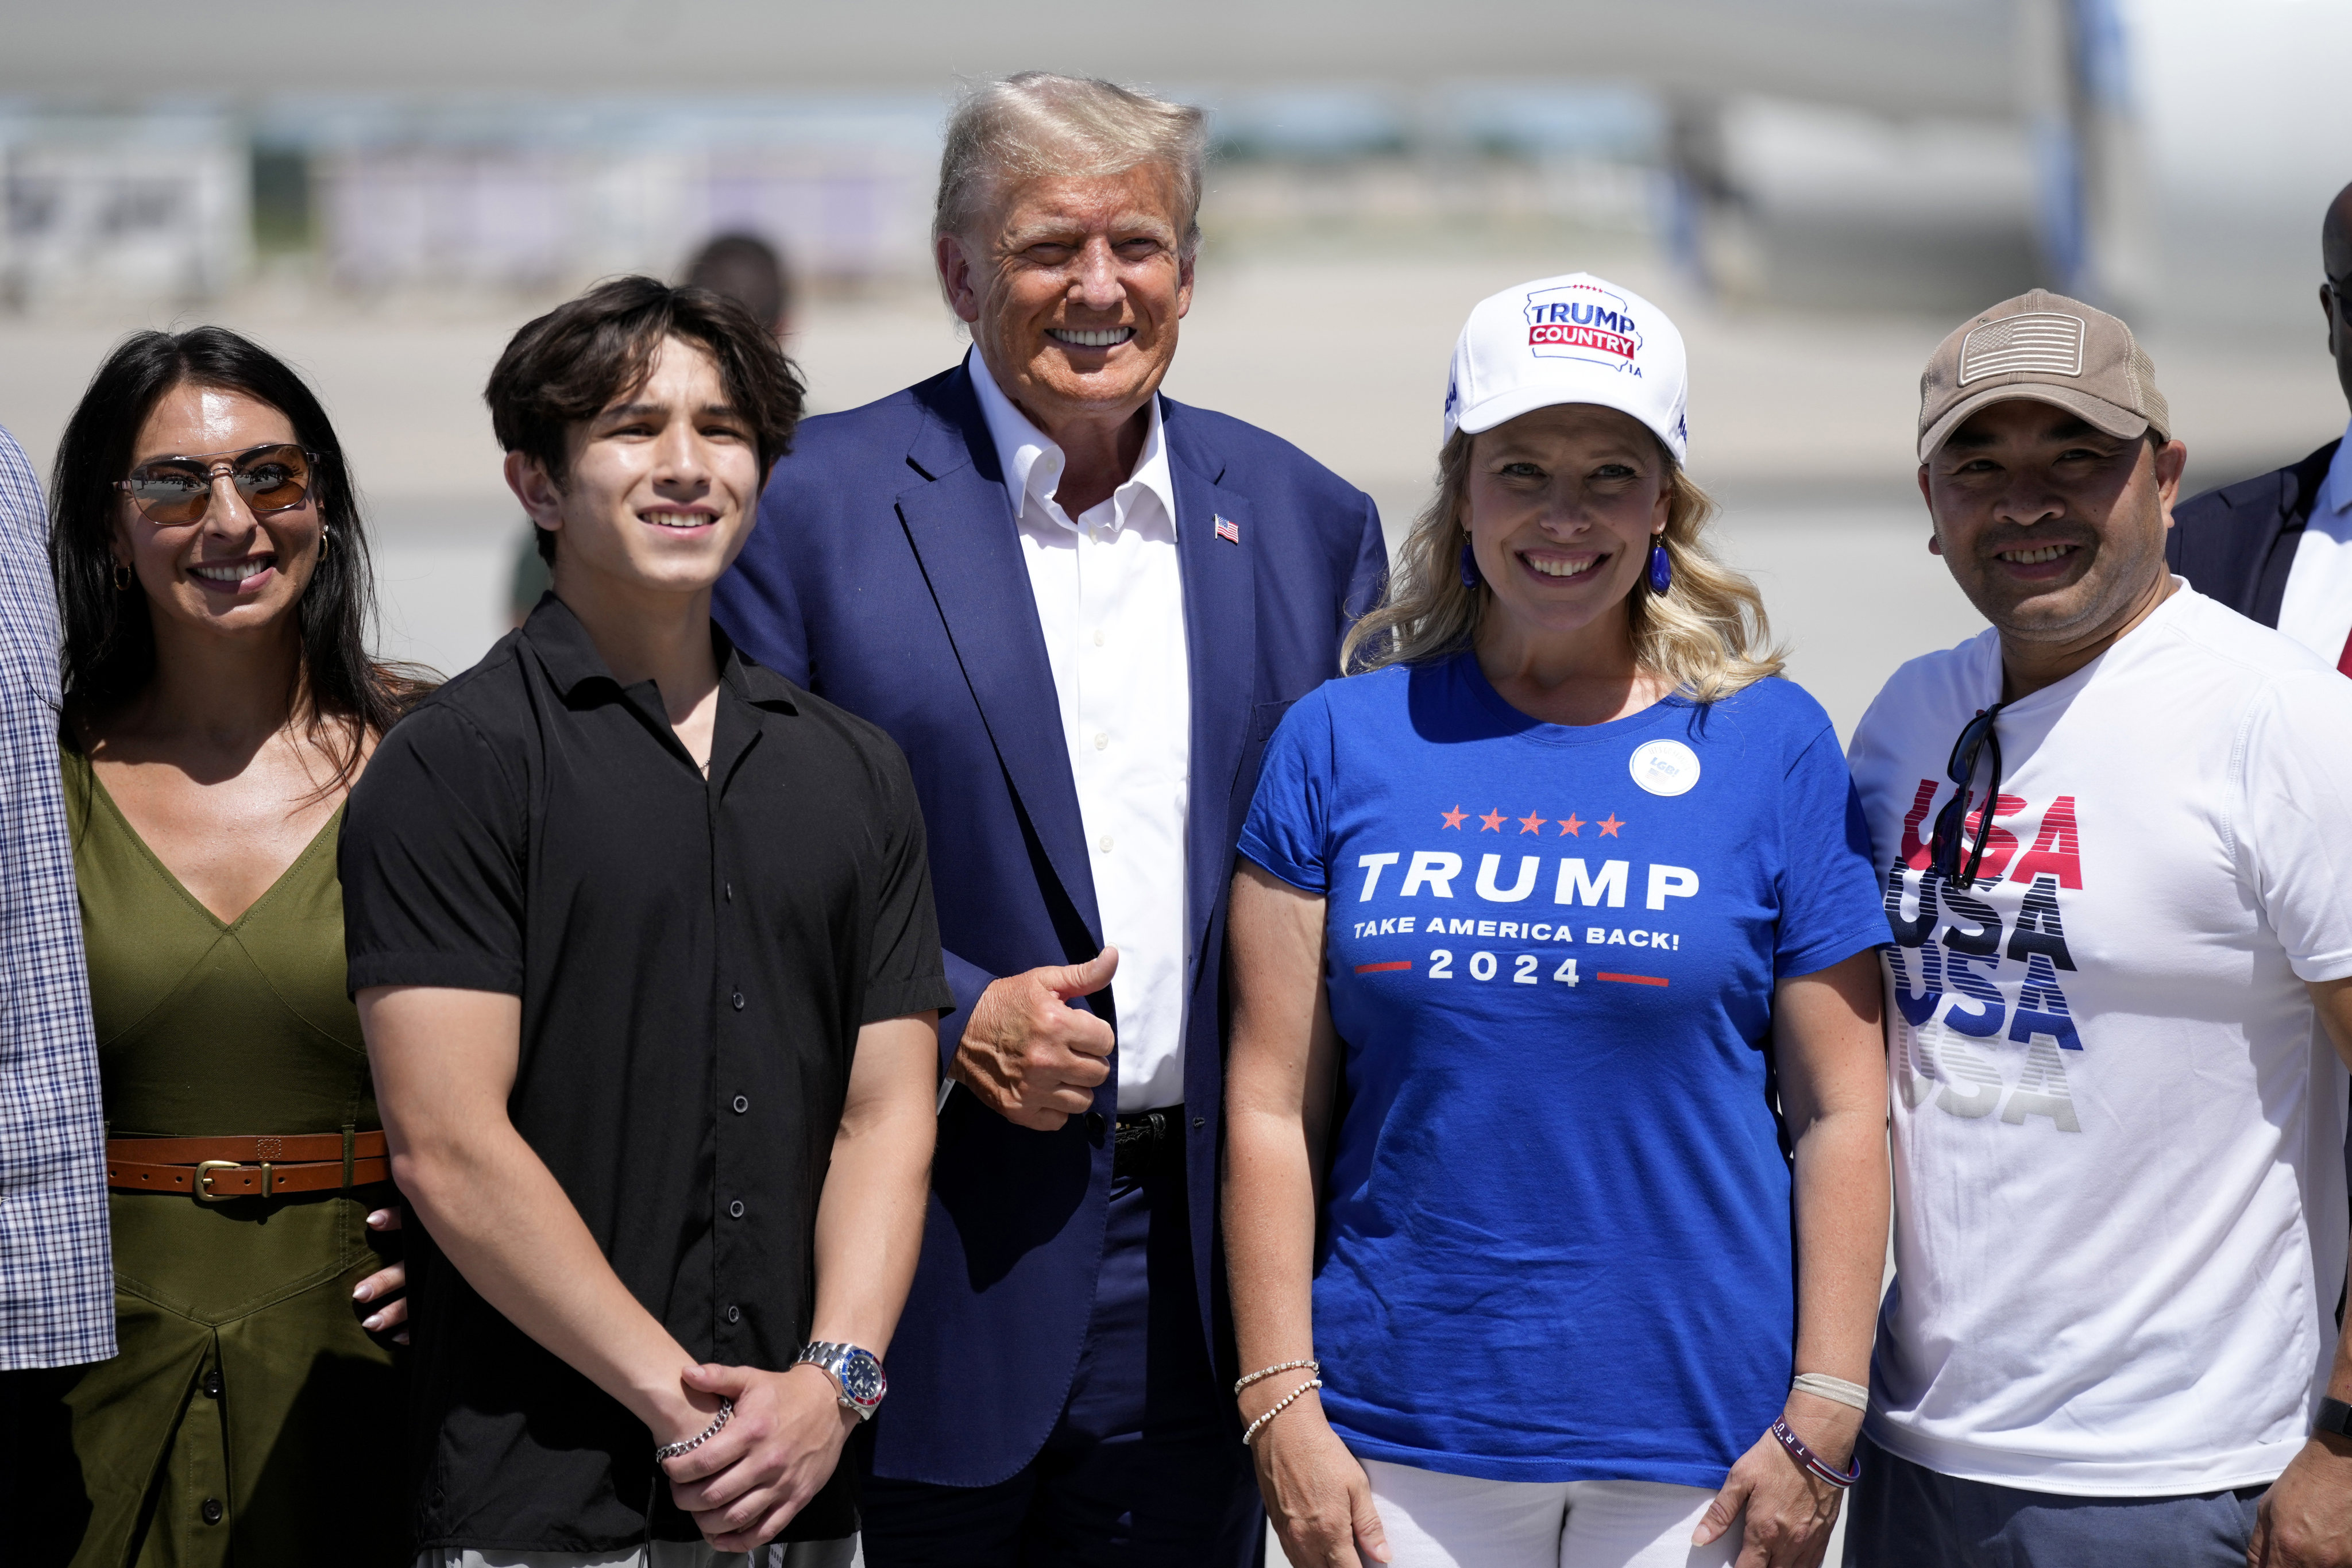 Republican presidential candidate and former US president Donald Trump at Des Moines International Airport after a visit to the Iowa State Fair on Saturday in Des Moines, Iowa. Photo: AP